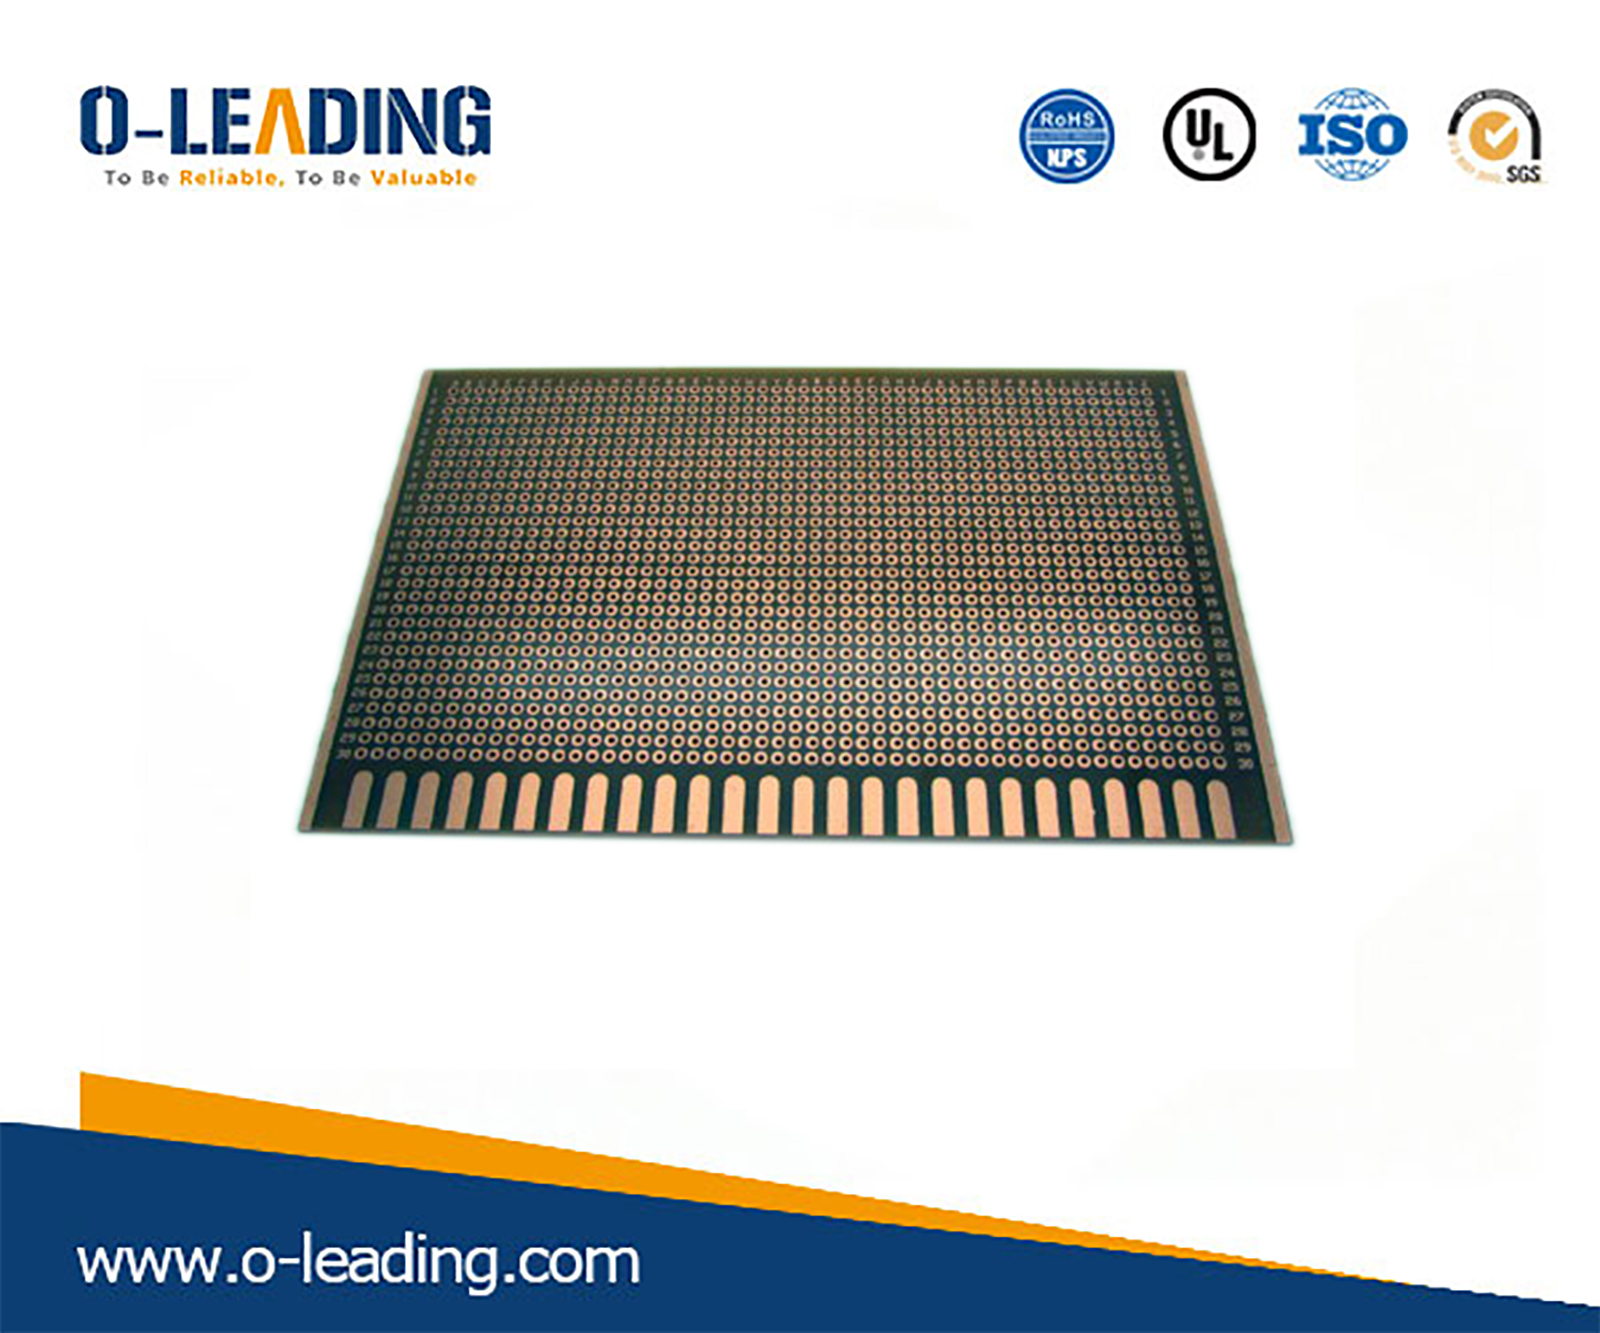 HEAVY IN HEAVY COPPER china manufacturer, manufacturer of PCB with China copper base